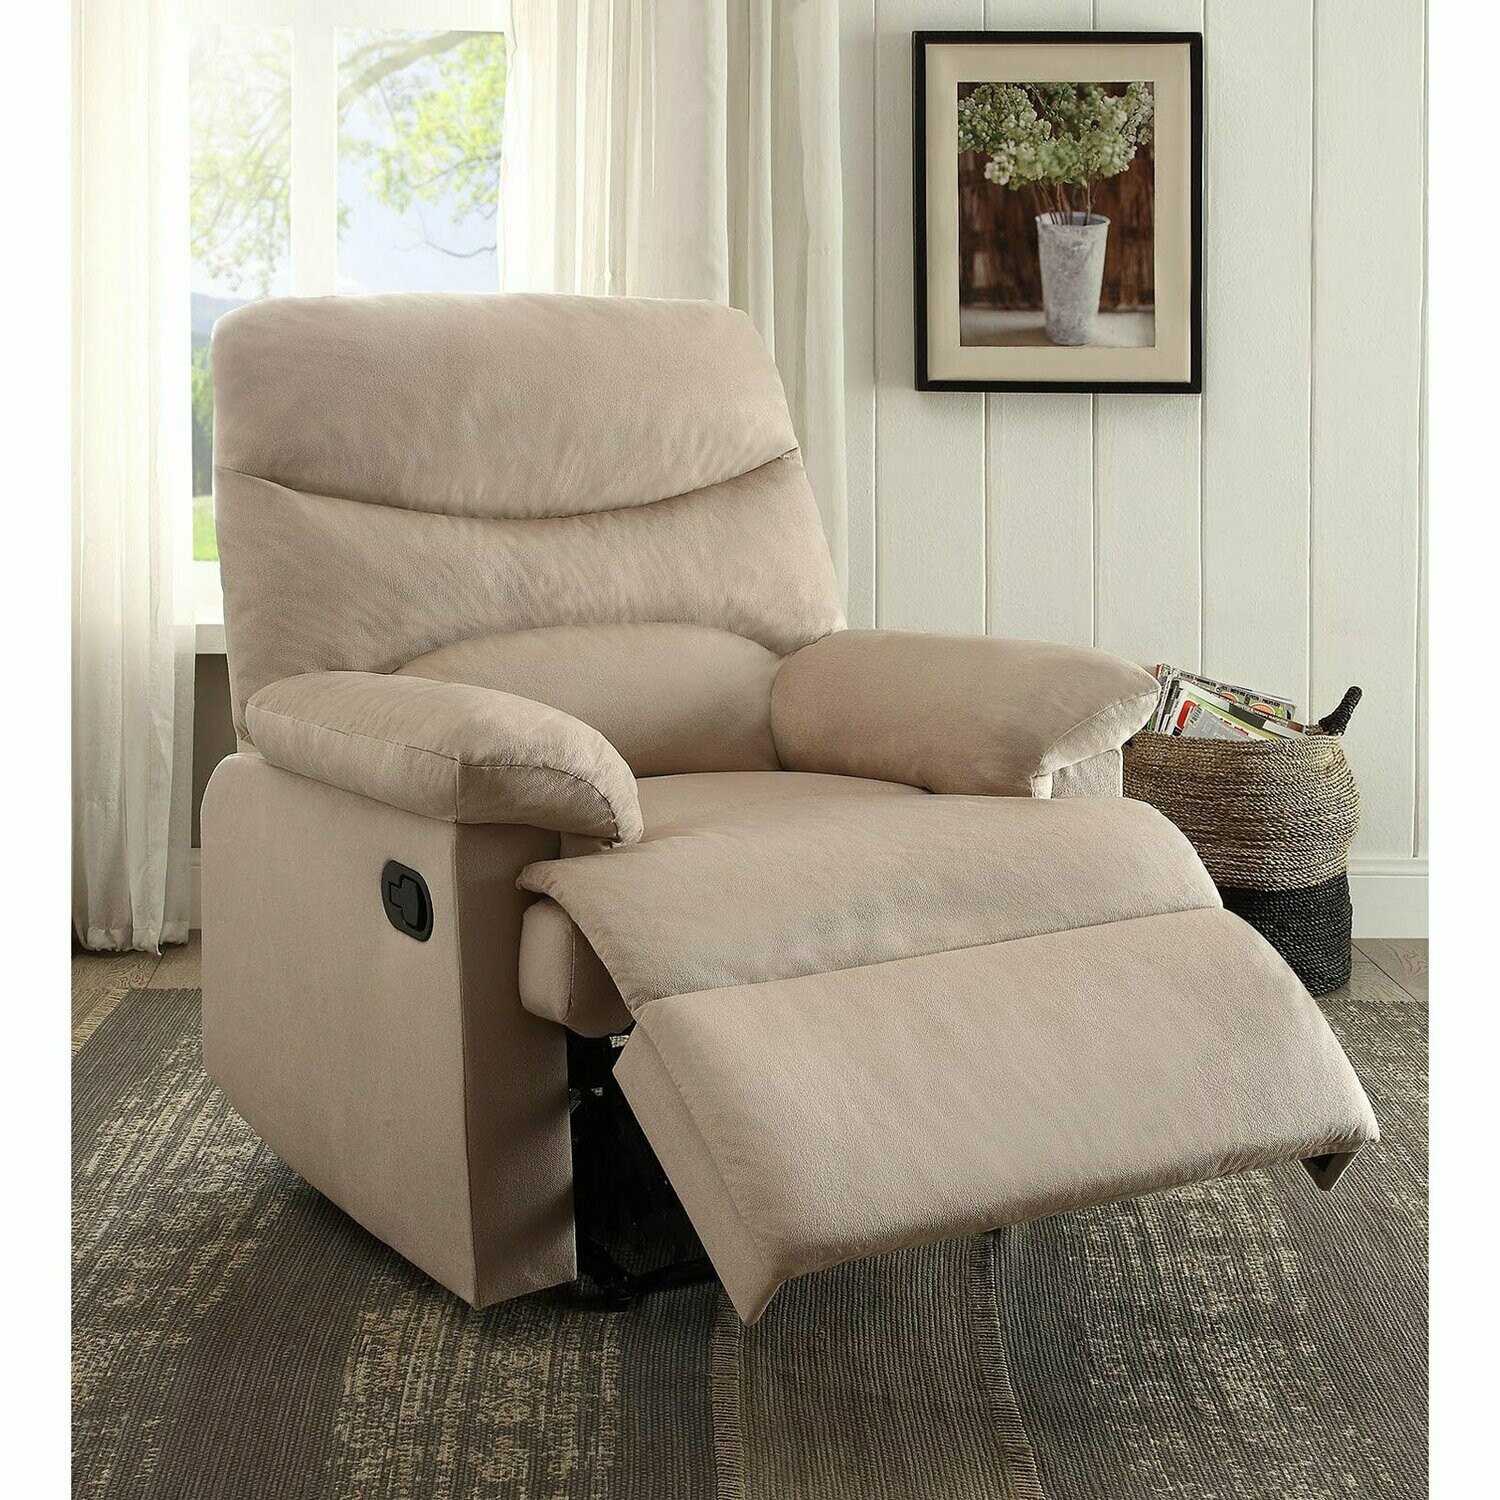 Contemporary LightBrown Woven Fabric Motion Recliner Chair Living Room Furniture